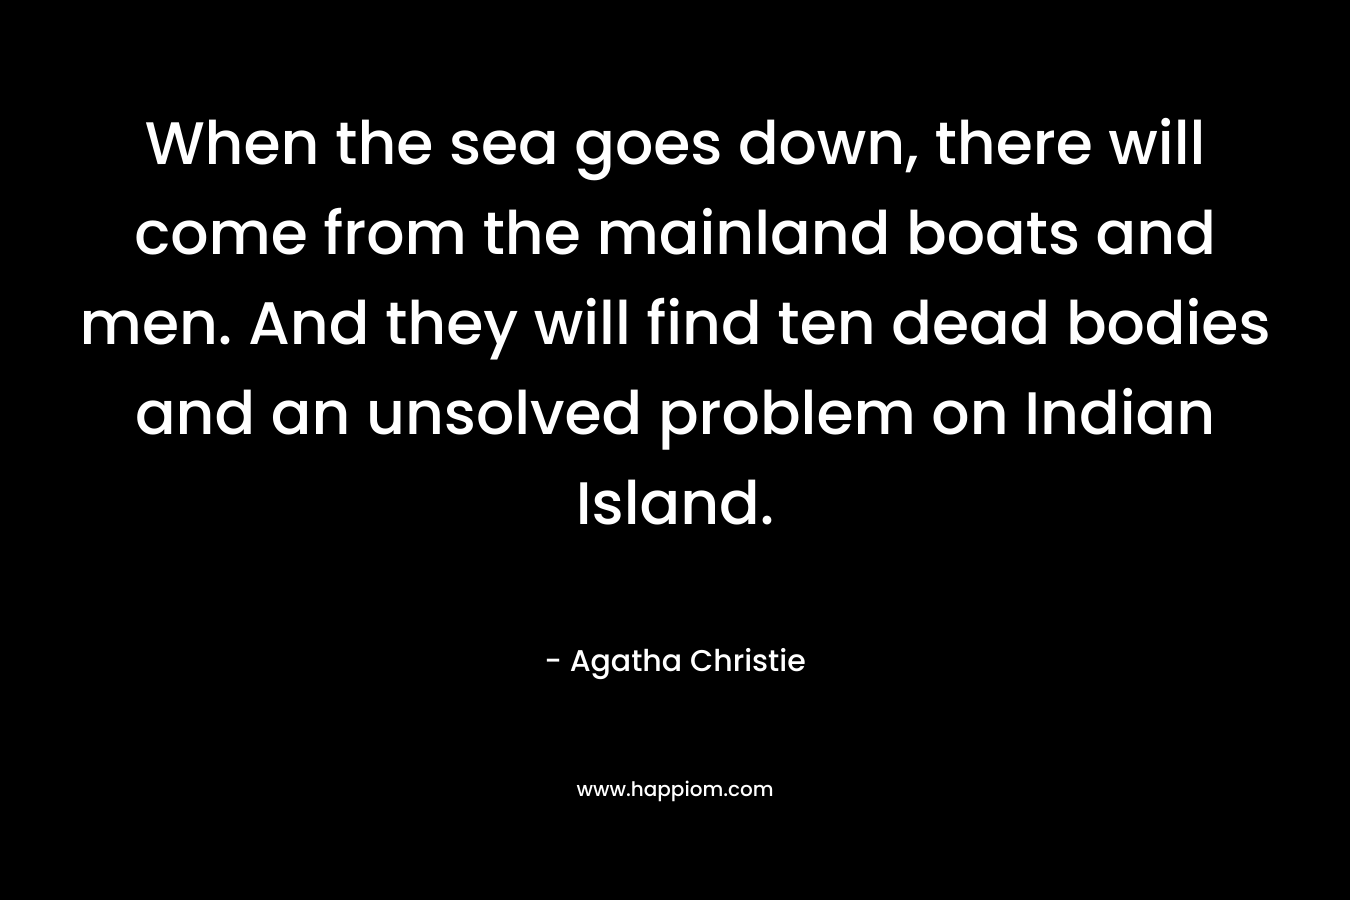 When the sea goes down, there will come from the mainland boats and men. And they will find ten dead bodies and an unsolved problem on Indian Island. – Agatha Christie